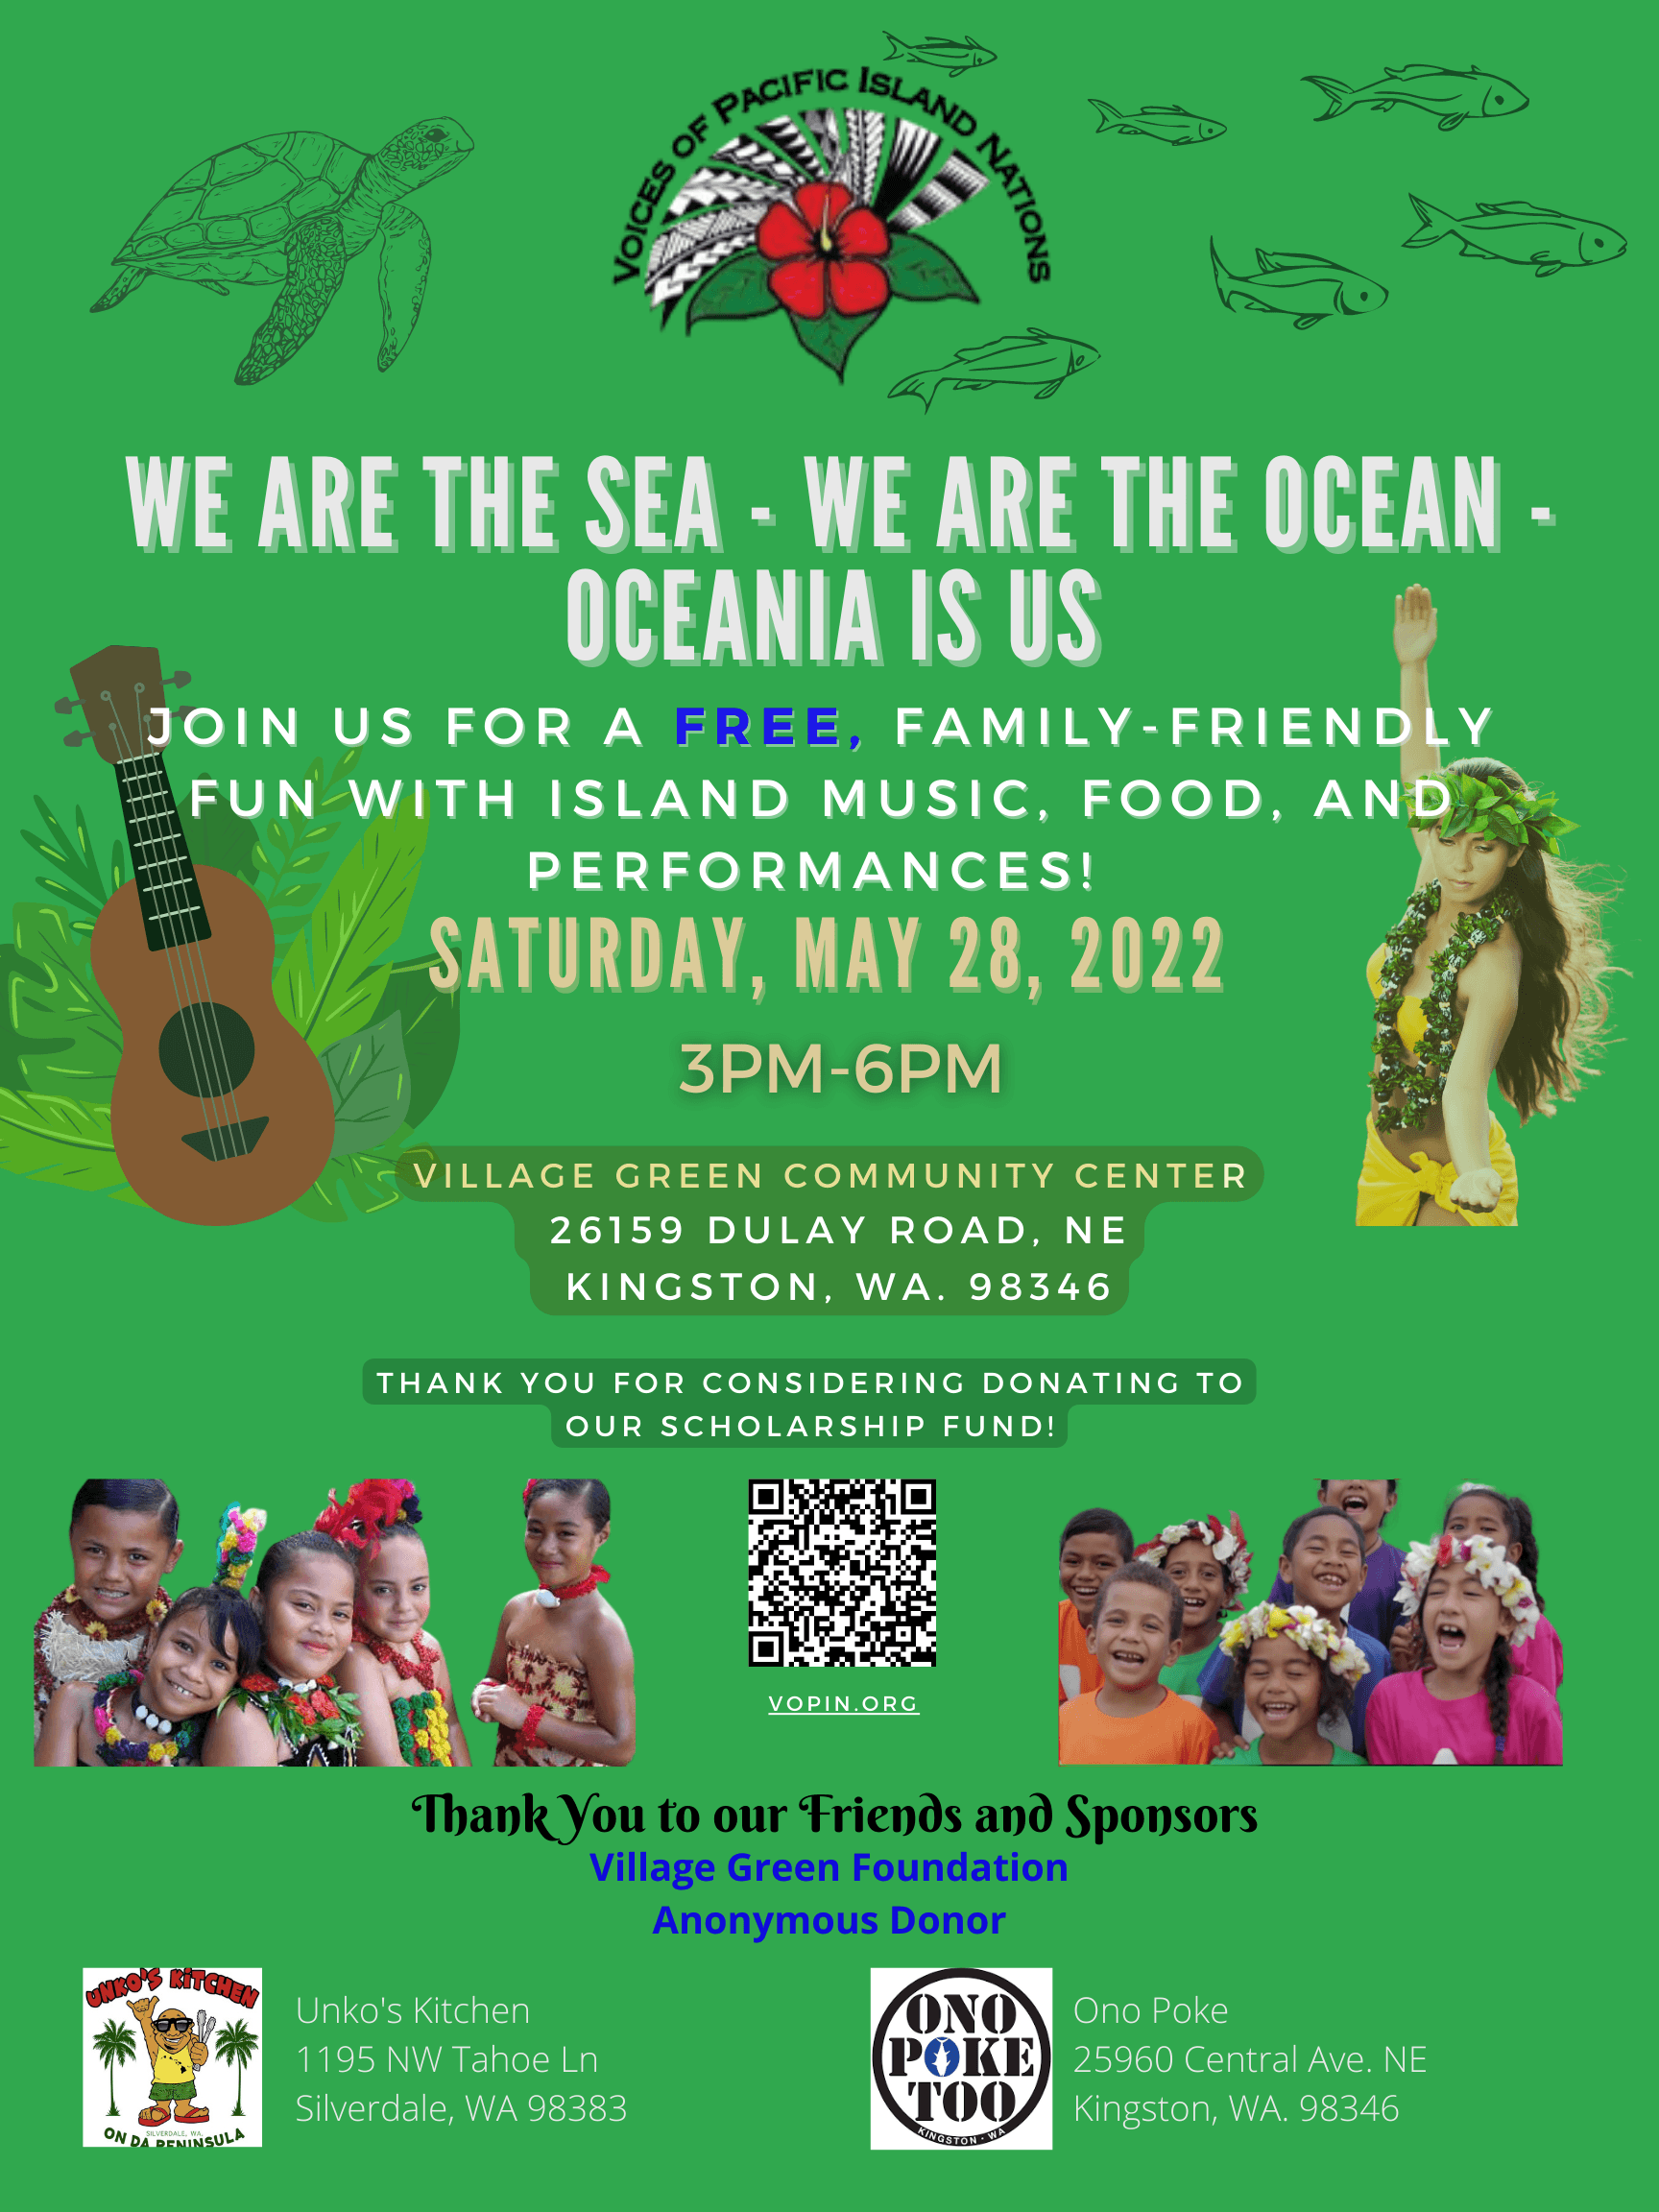 We are the Sea - We are the Ocean - Oceania is Us